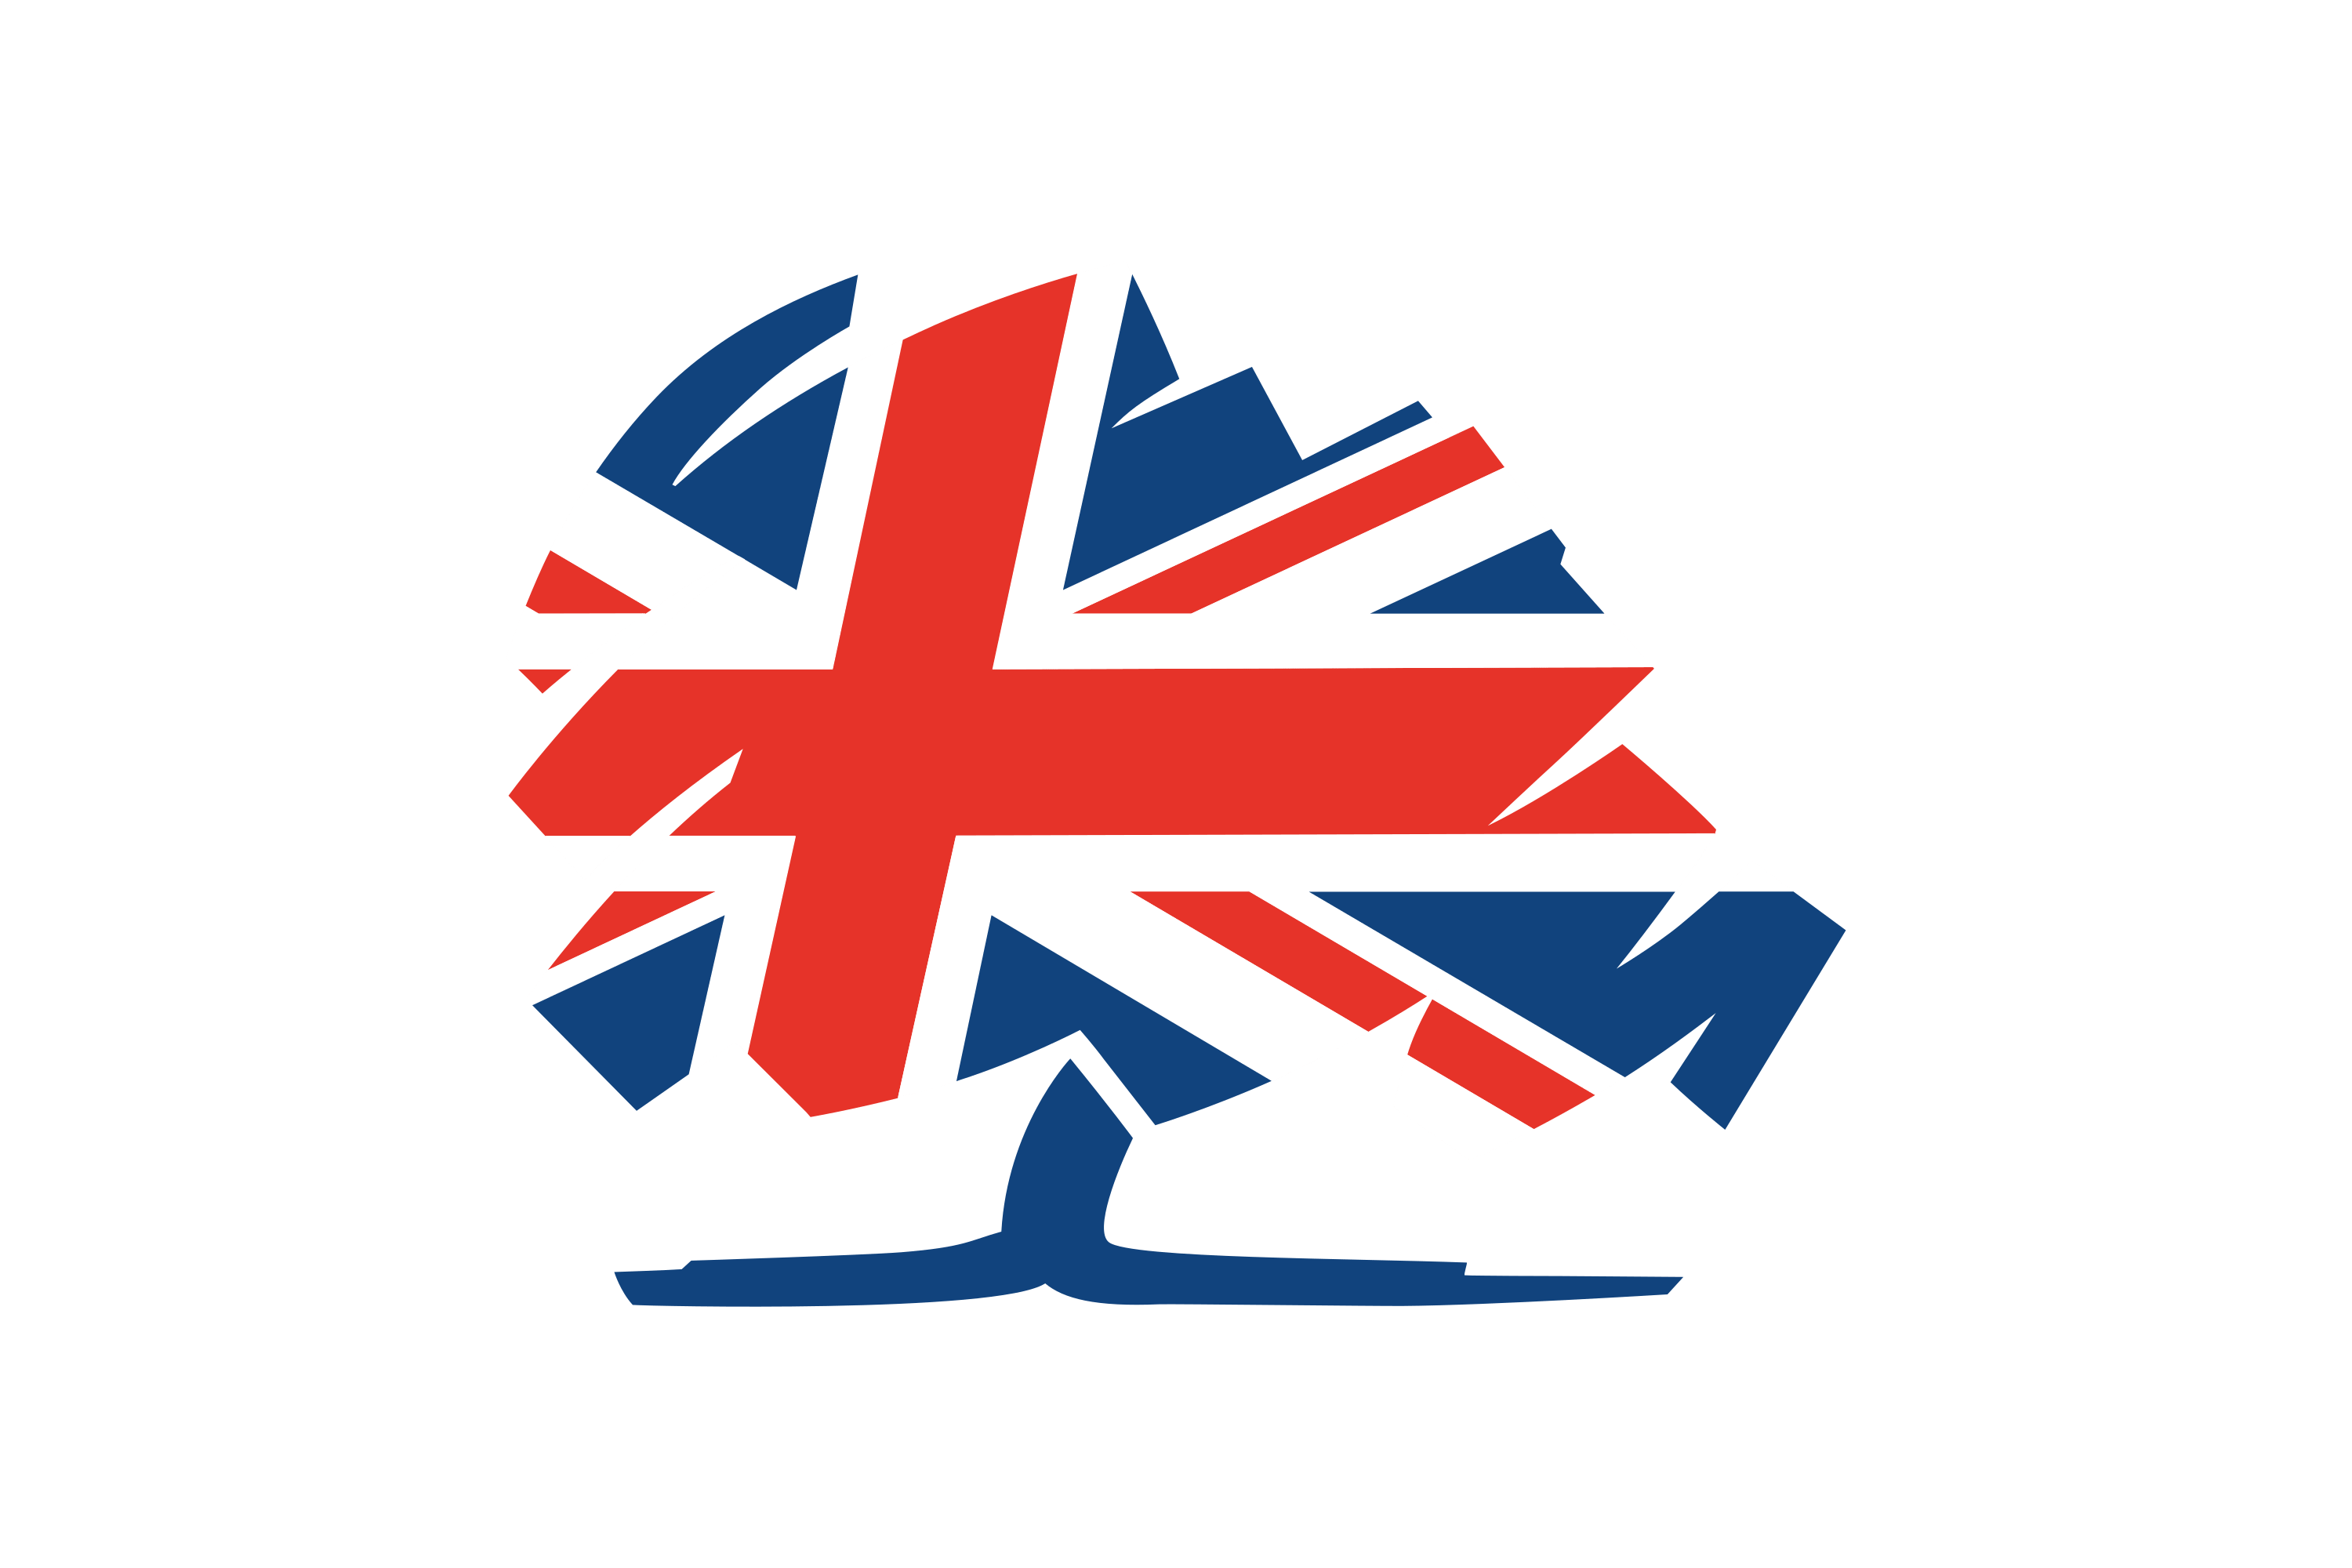 Download Conservative Party (Conservative and Unionist Party) Logo in